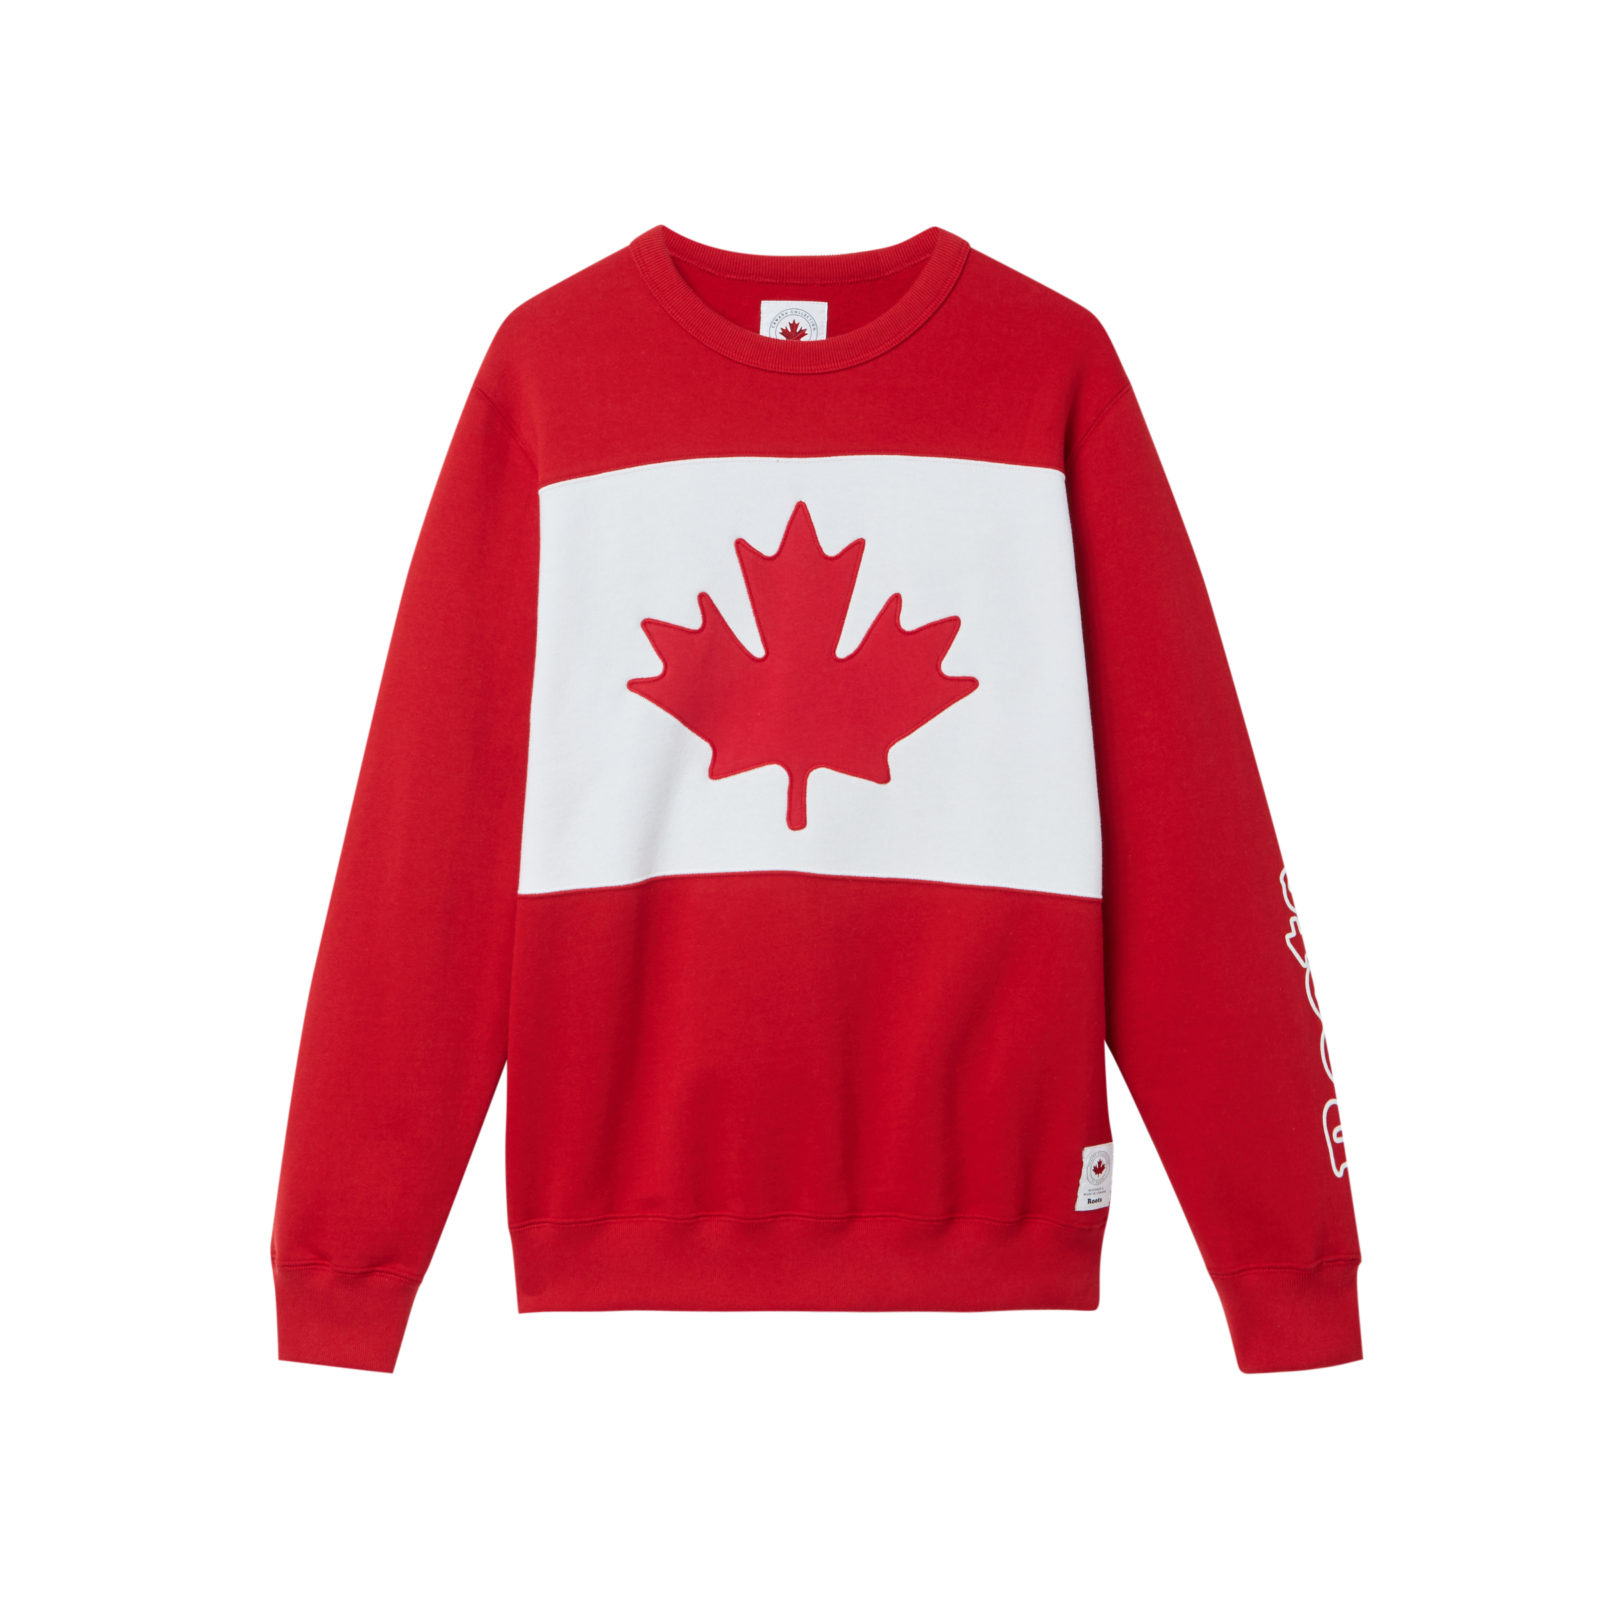 travel clothing made in canada